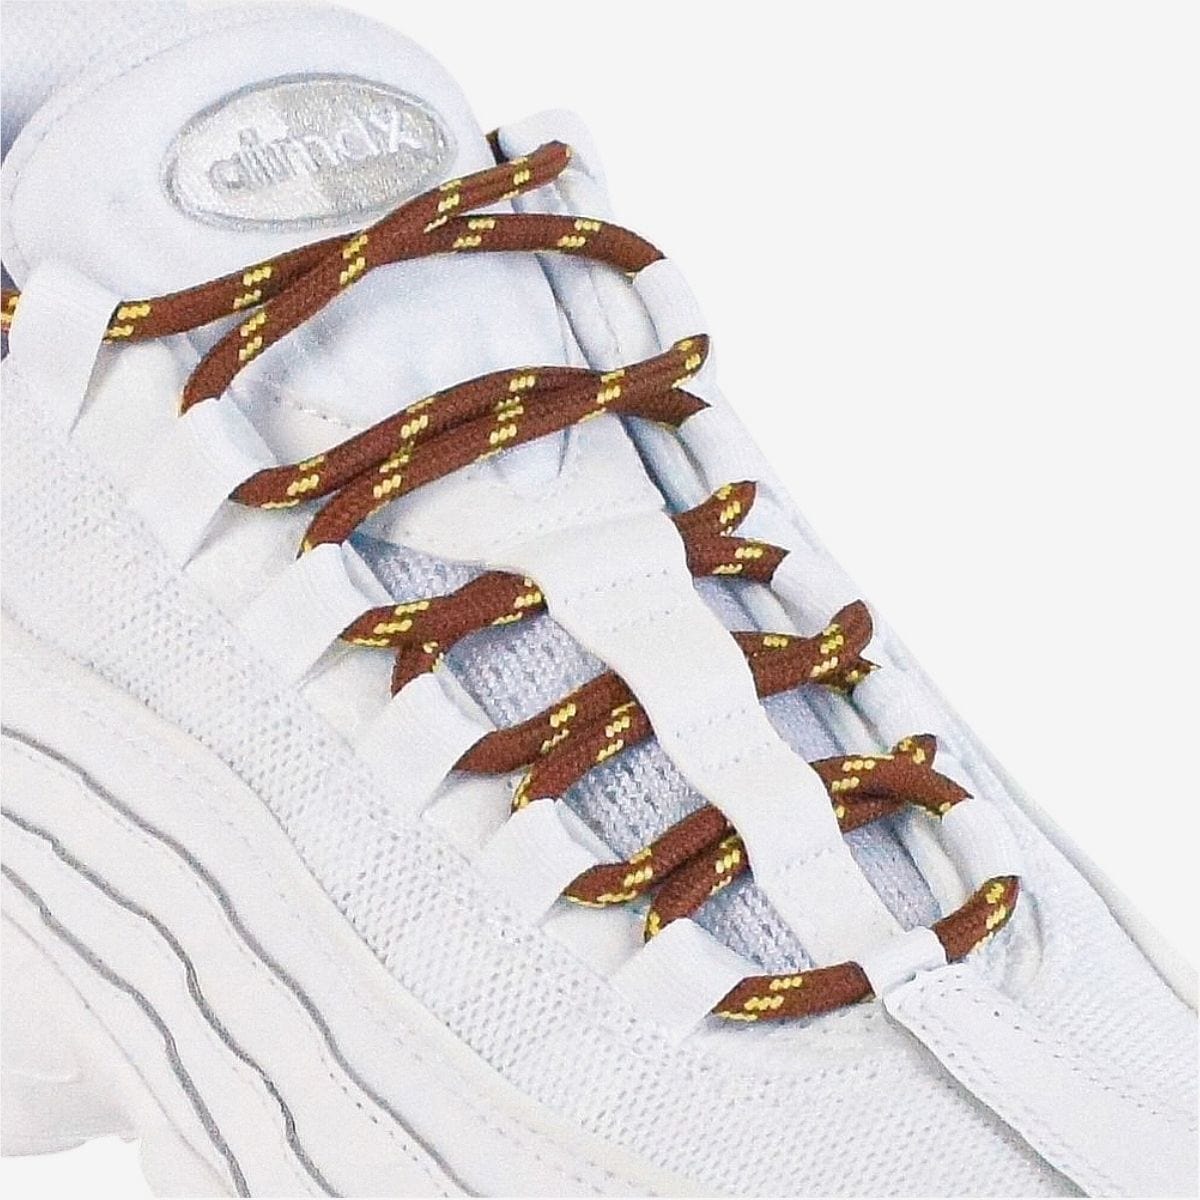 walking-shoe-laces-online-in-australia-colour-deep-brown-and-yellow